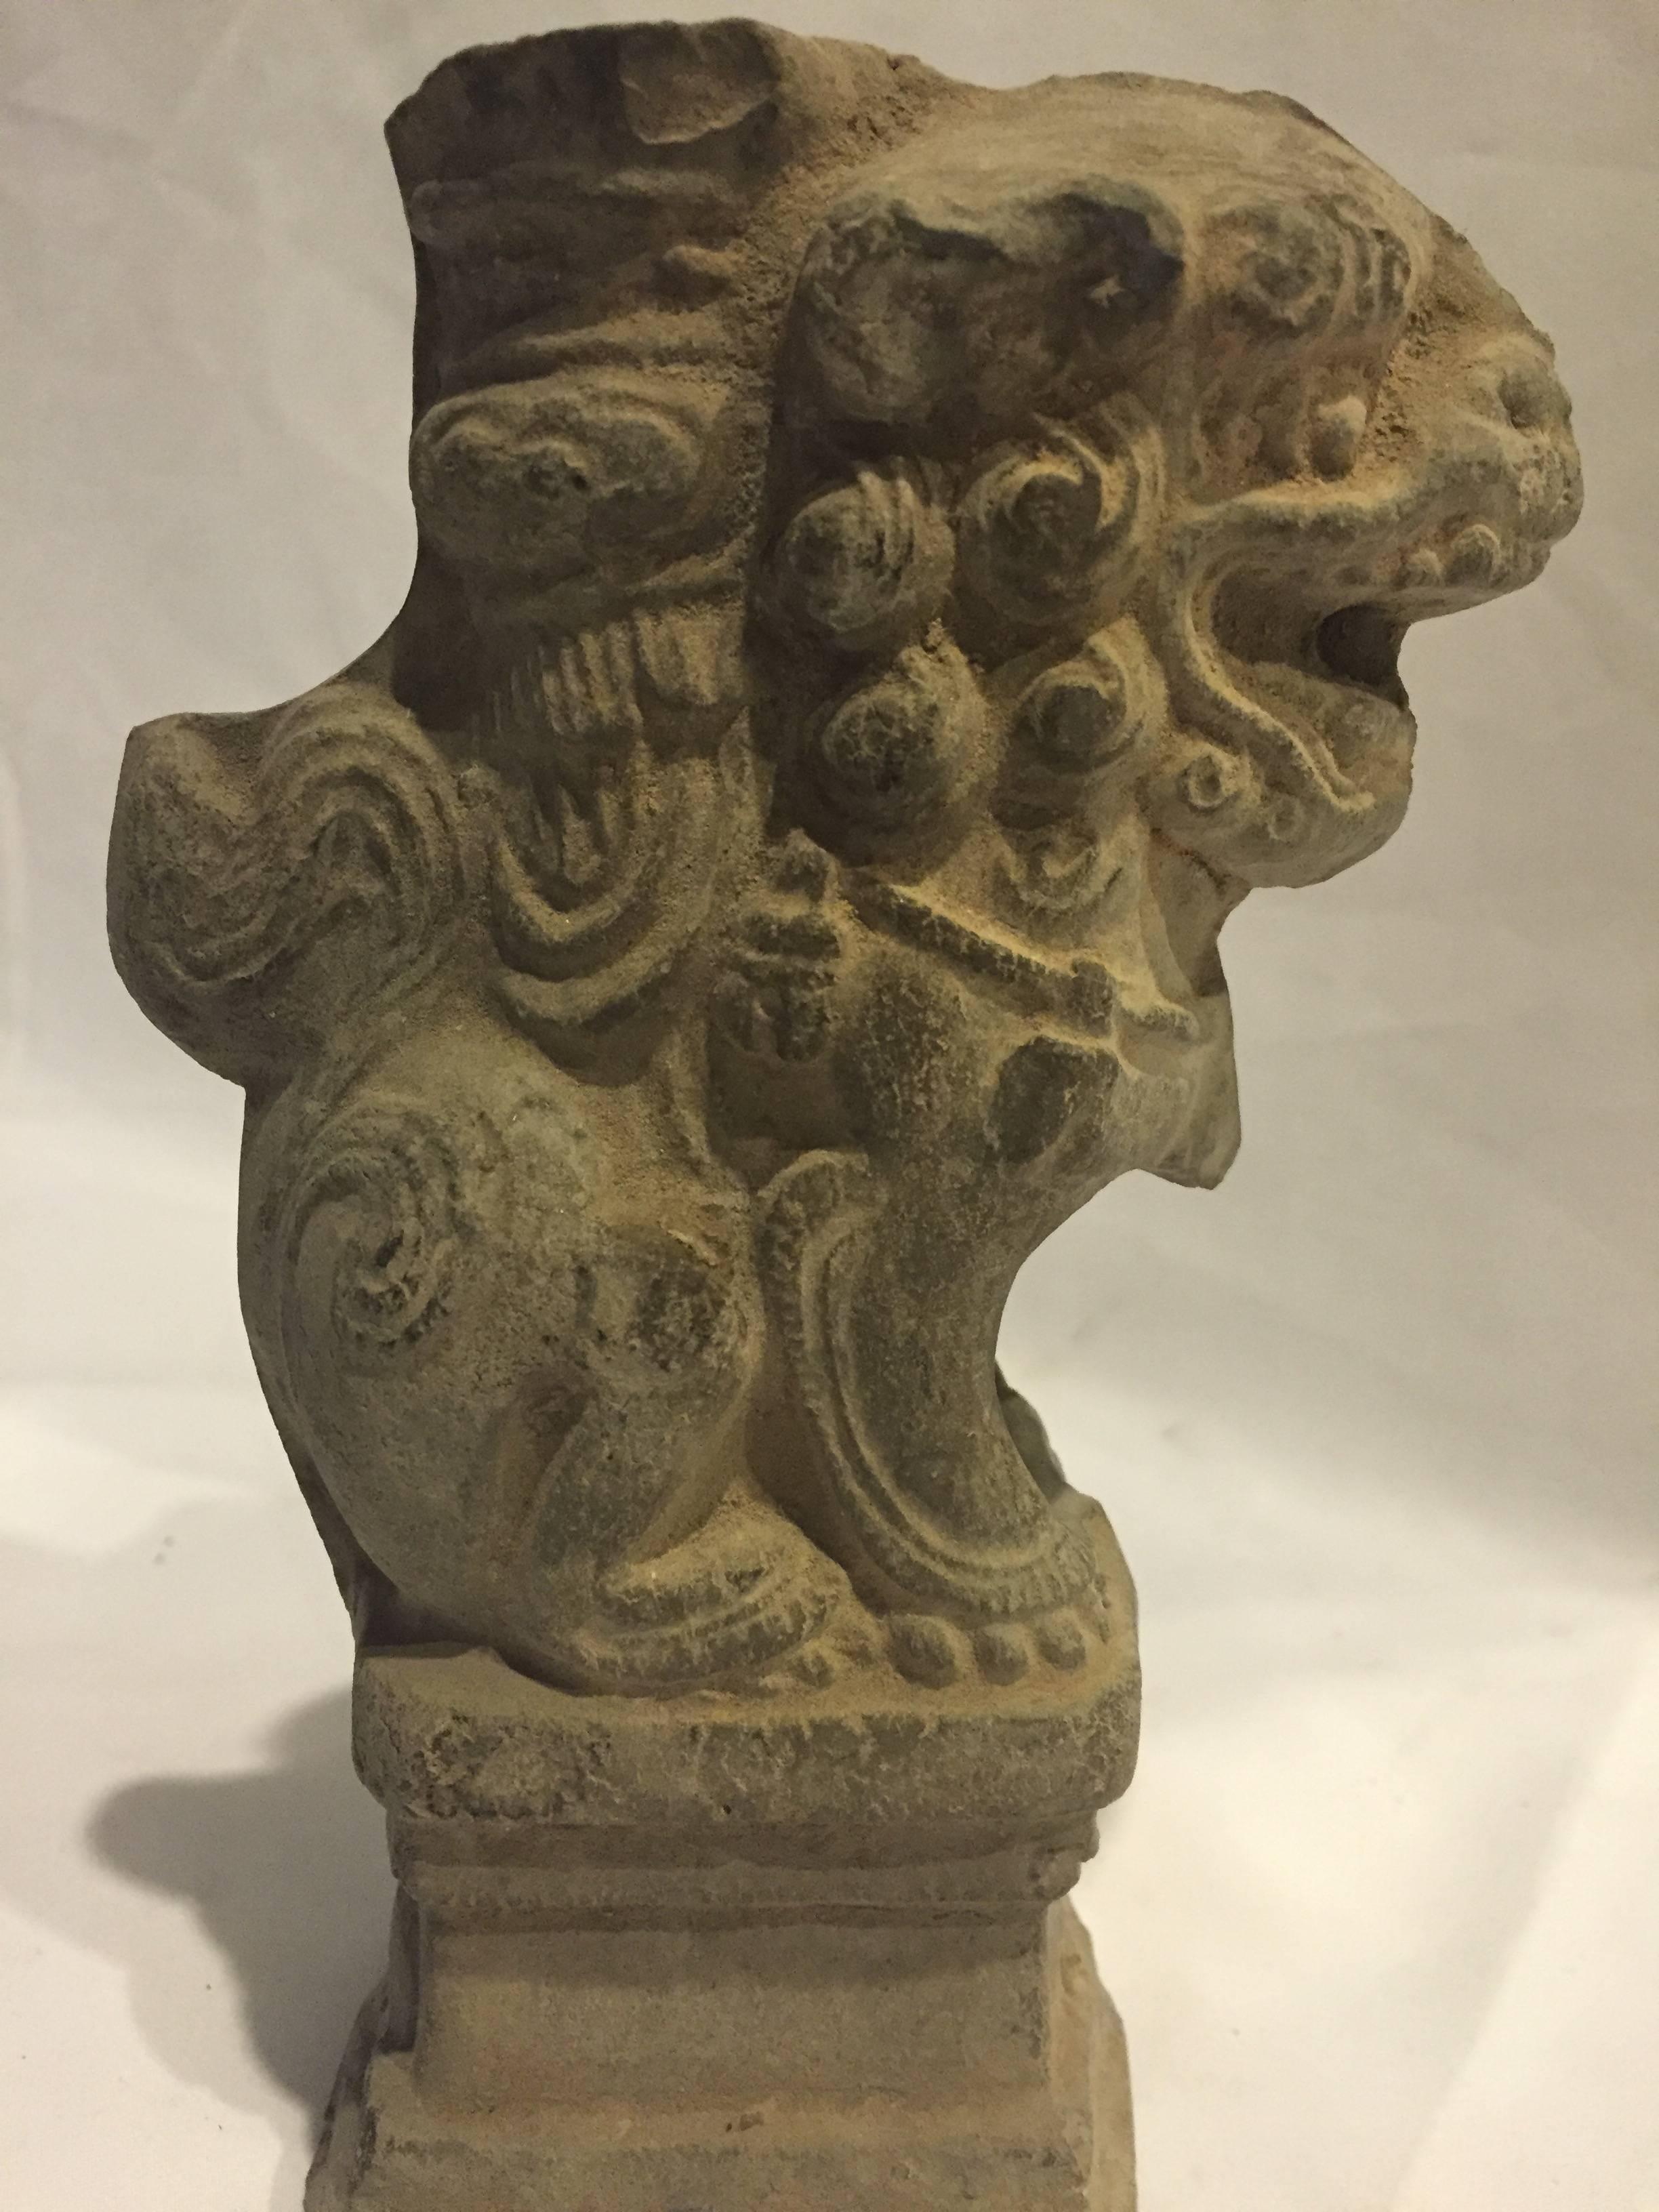 This is a very rare piece from China's northern frontier Shanxi province. The candle holder is of a brick, terracotta material. Very Fine details can be observed on the foo dog, which include its curly hair, bells on his collar and decorated saddle.